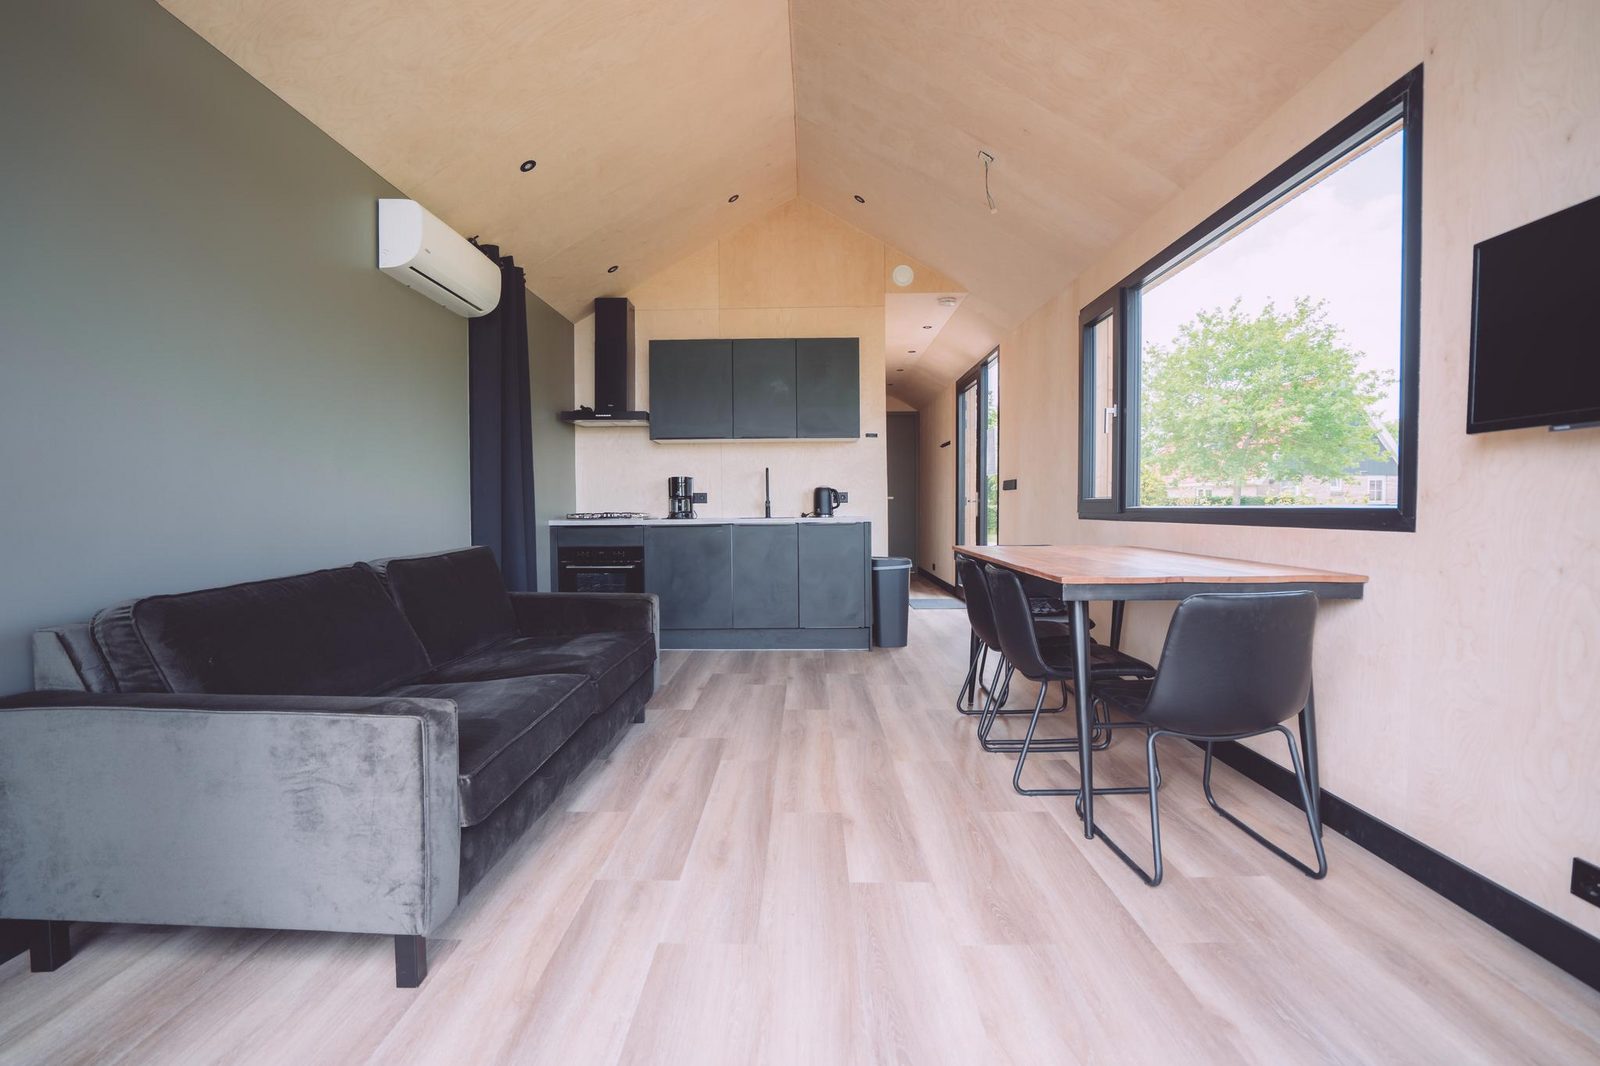 Groupaccommodation 'de Blokhut' + 4 4-personTiny Houses (16 people)